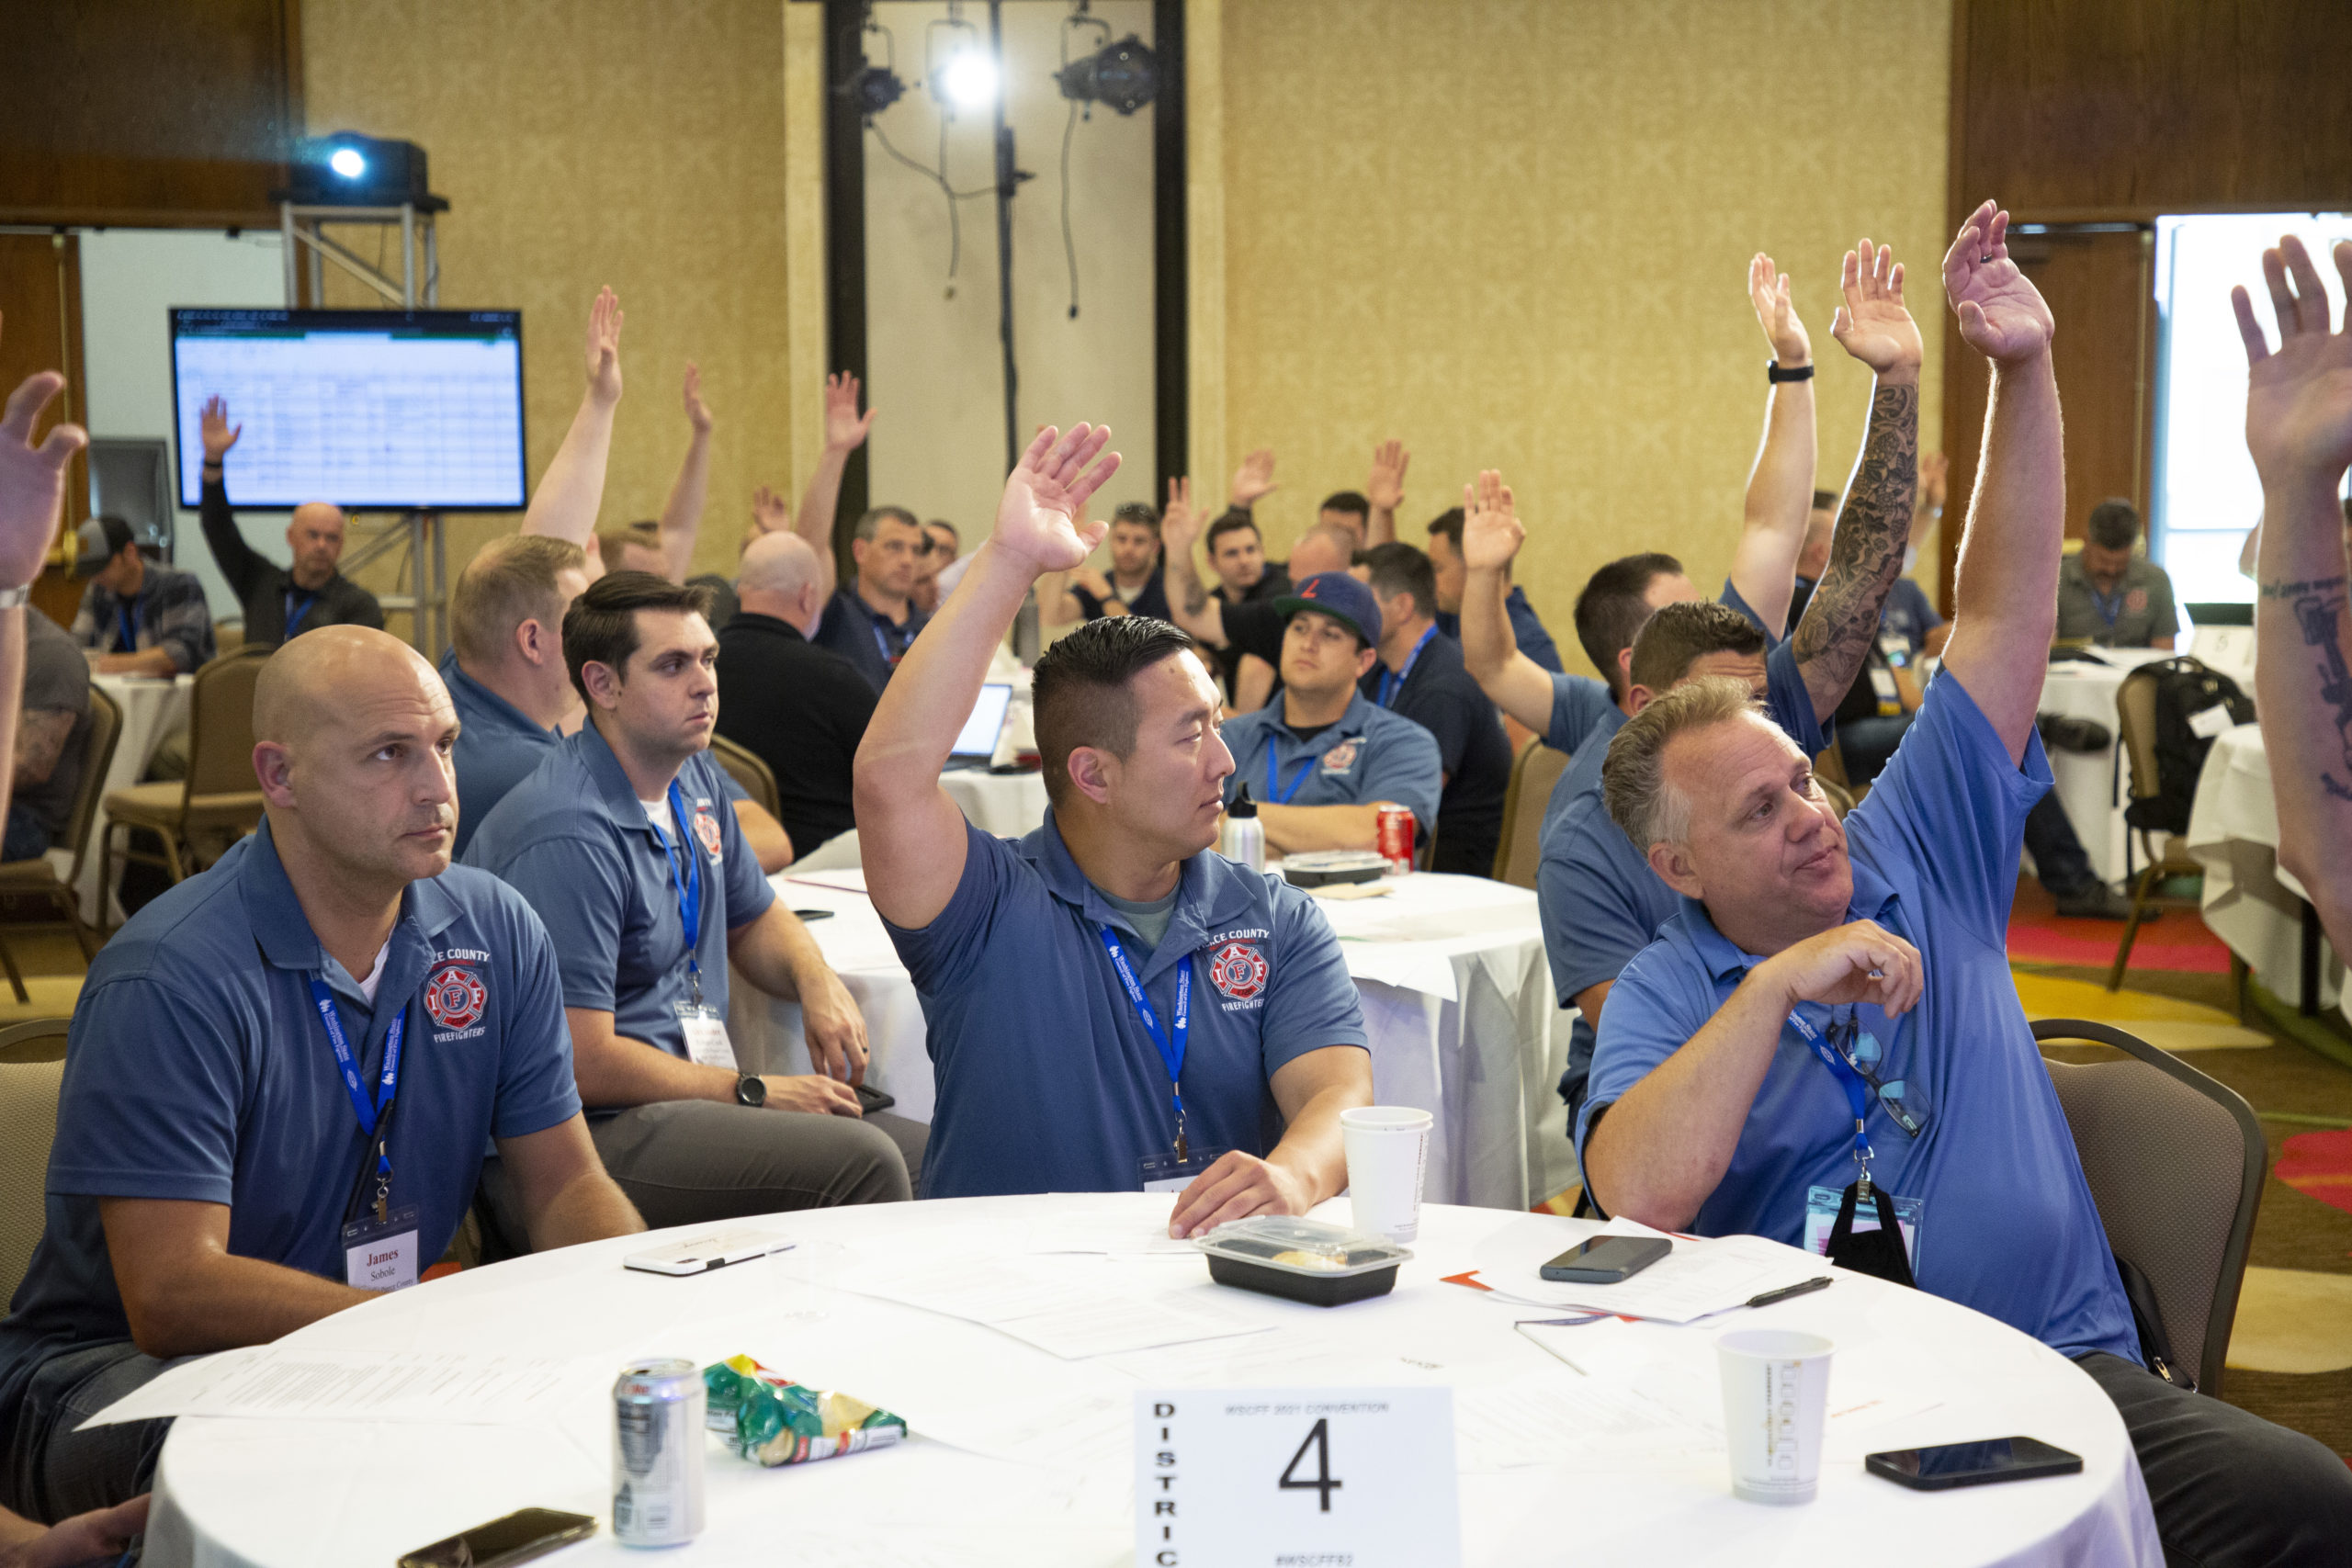 2021 WSCFF Convention Highlights